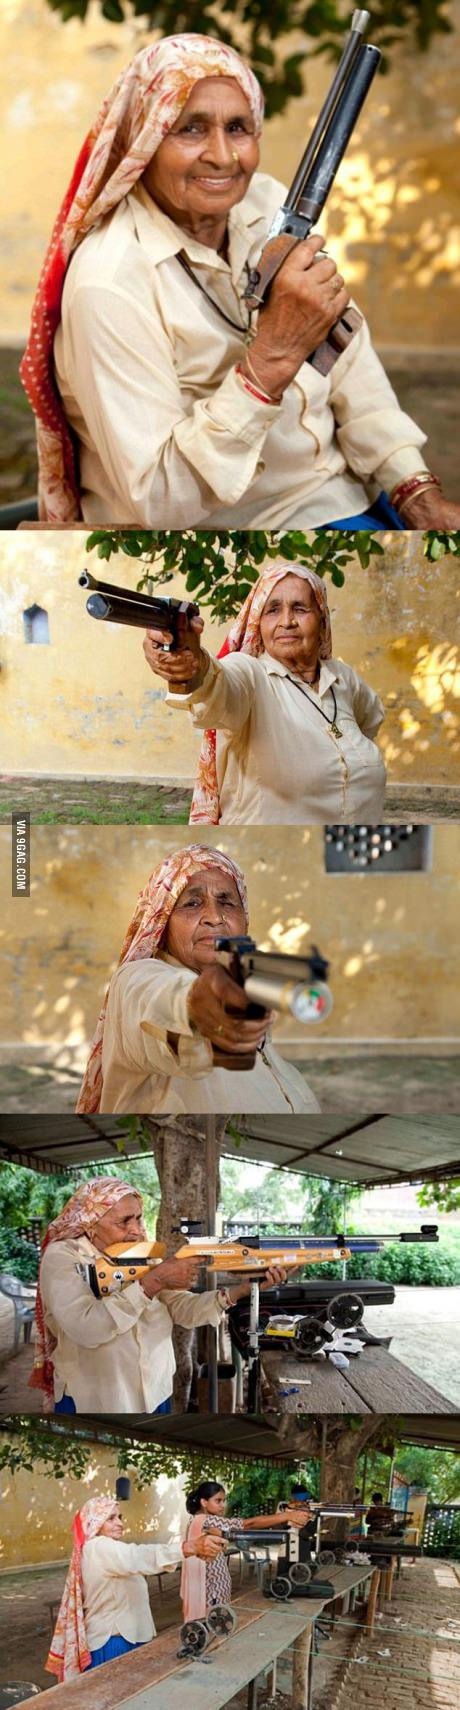 this indian gran mother 78 , happens to be the best sharpshooter in the world - meme